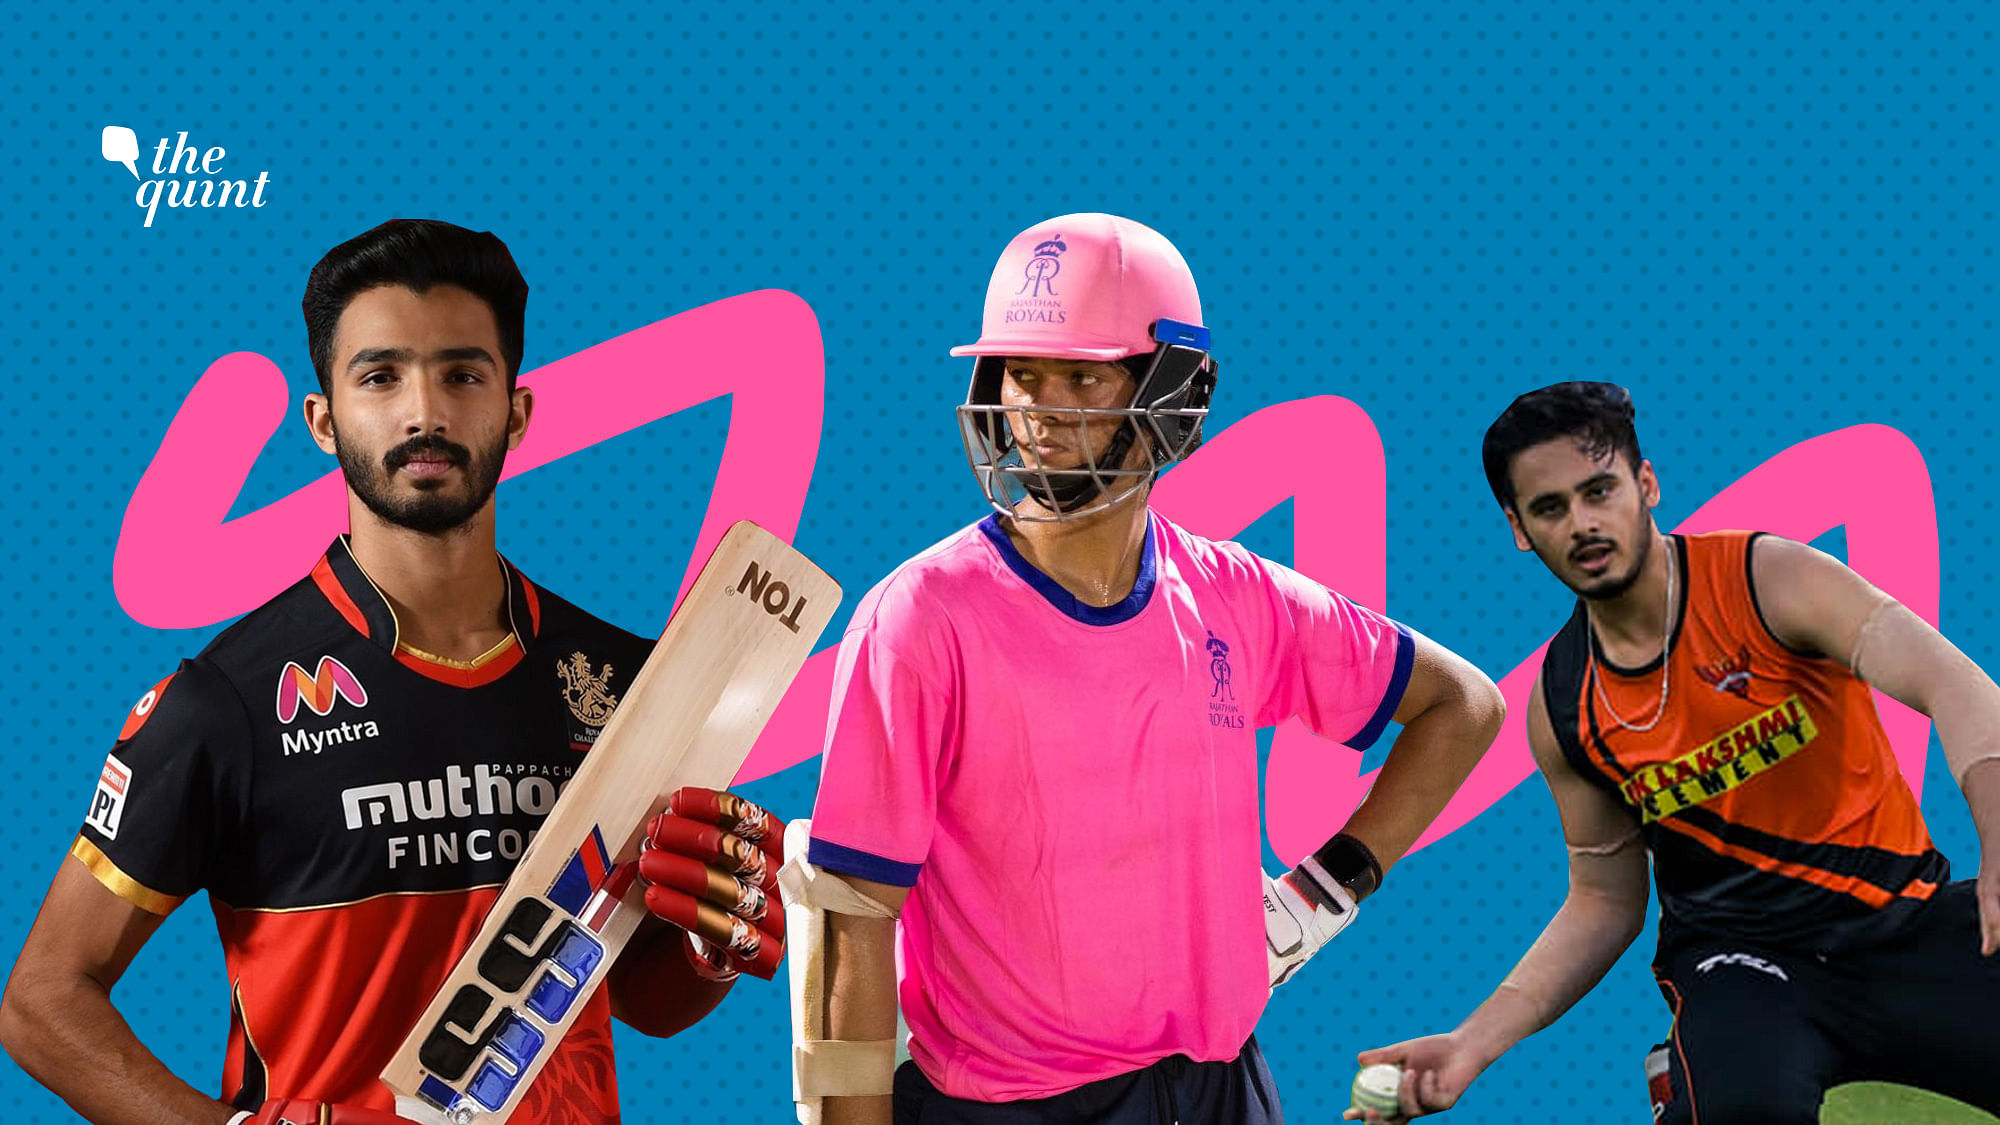 Devdutt Padikkal, Yashasvi Jaiswal and Abdul Samad – three youngsters to watch out for in IPL 2020.